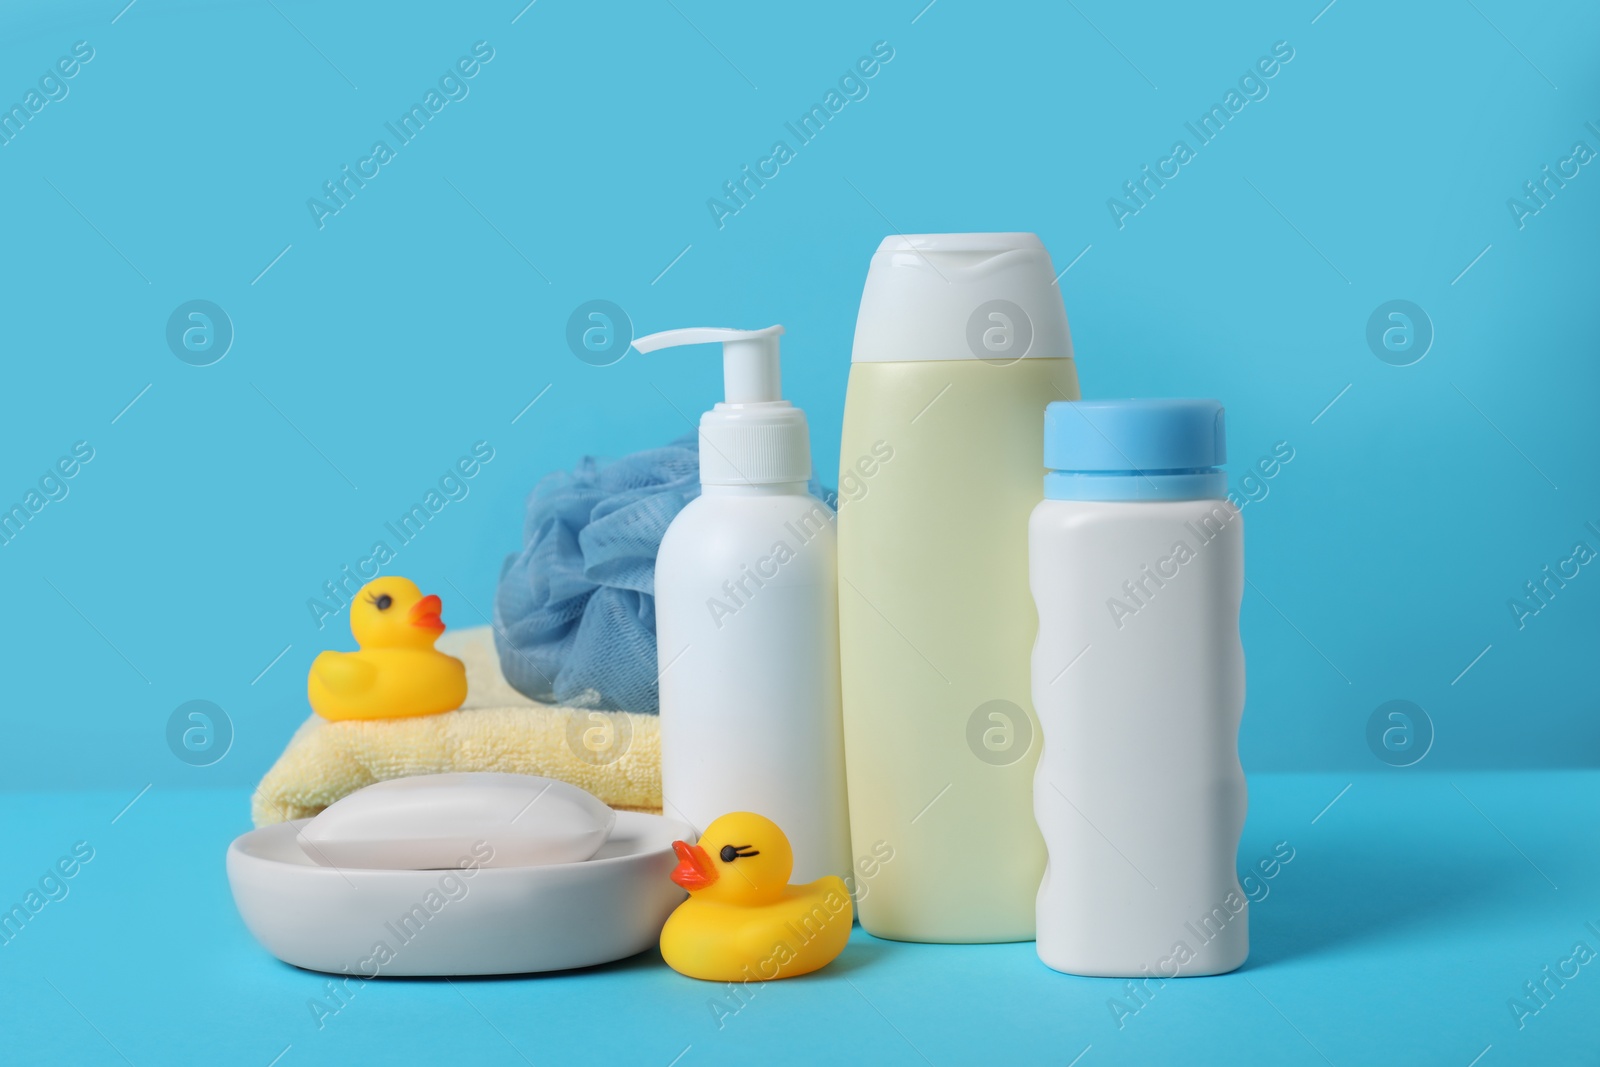 Photo of Baby cosmetic products, bath ducks, sponge and towel on light blue background